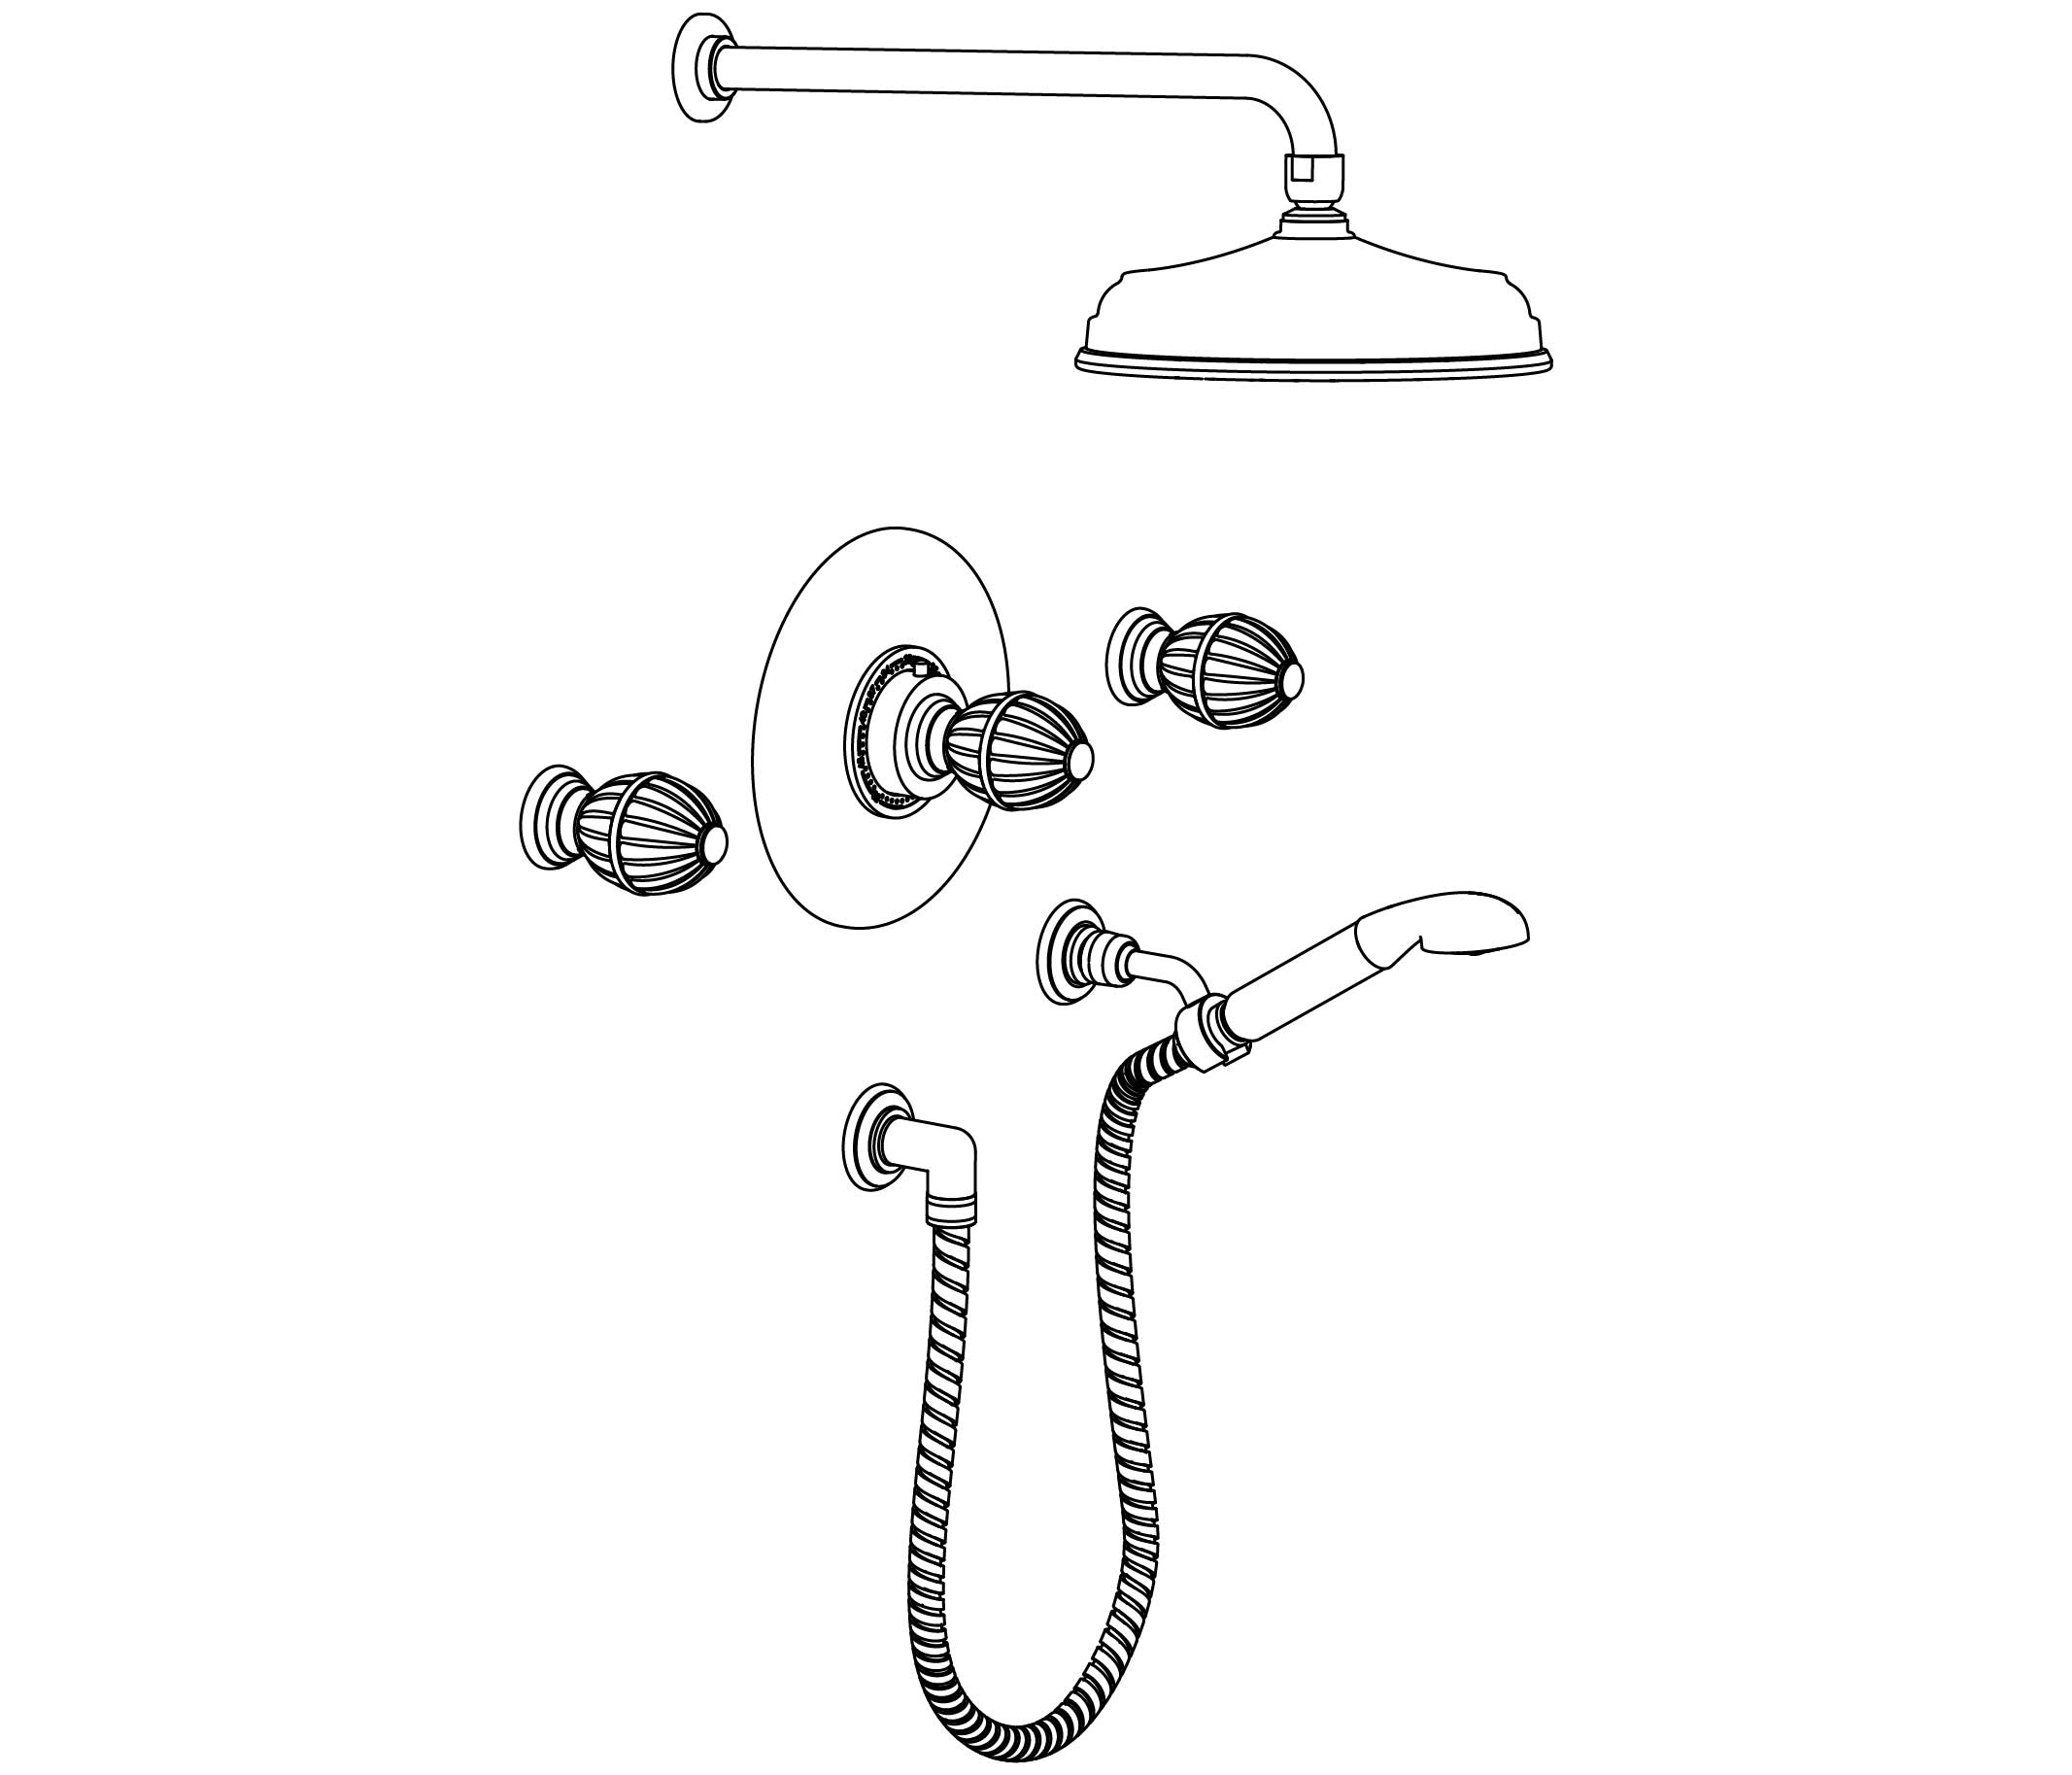 C71-2308T1 Thermostatic shower mixer package